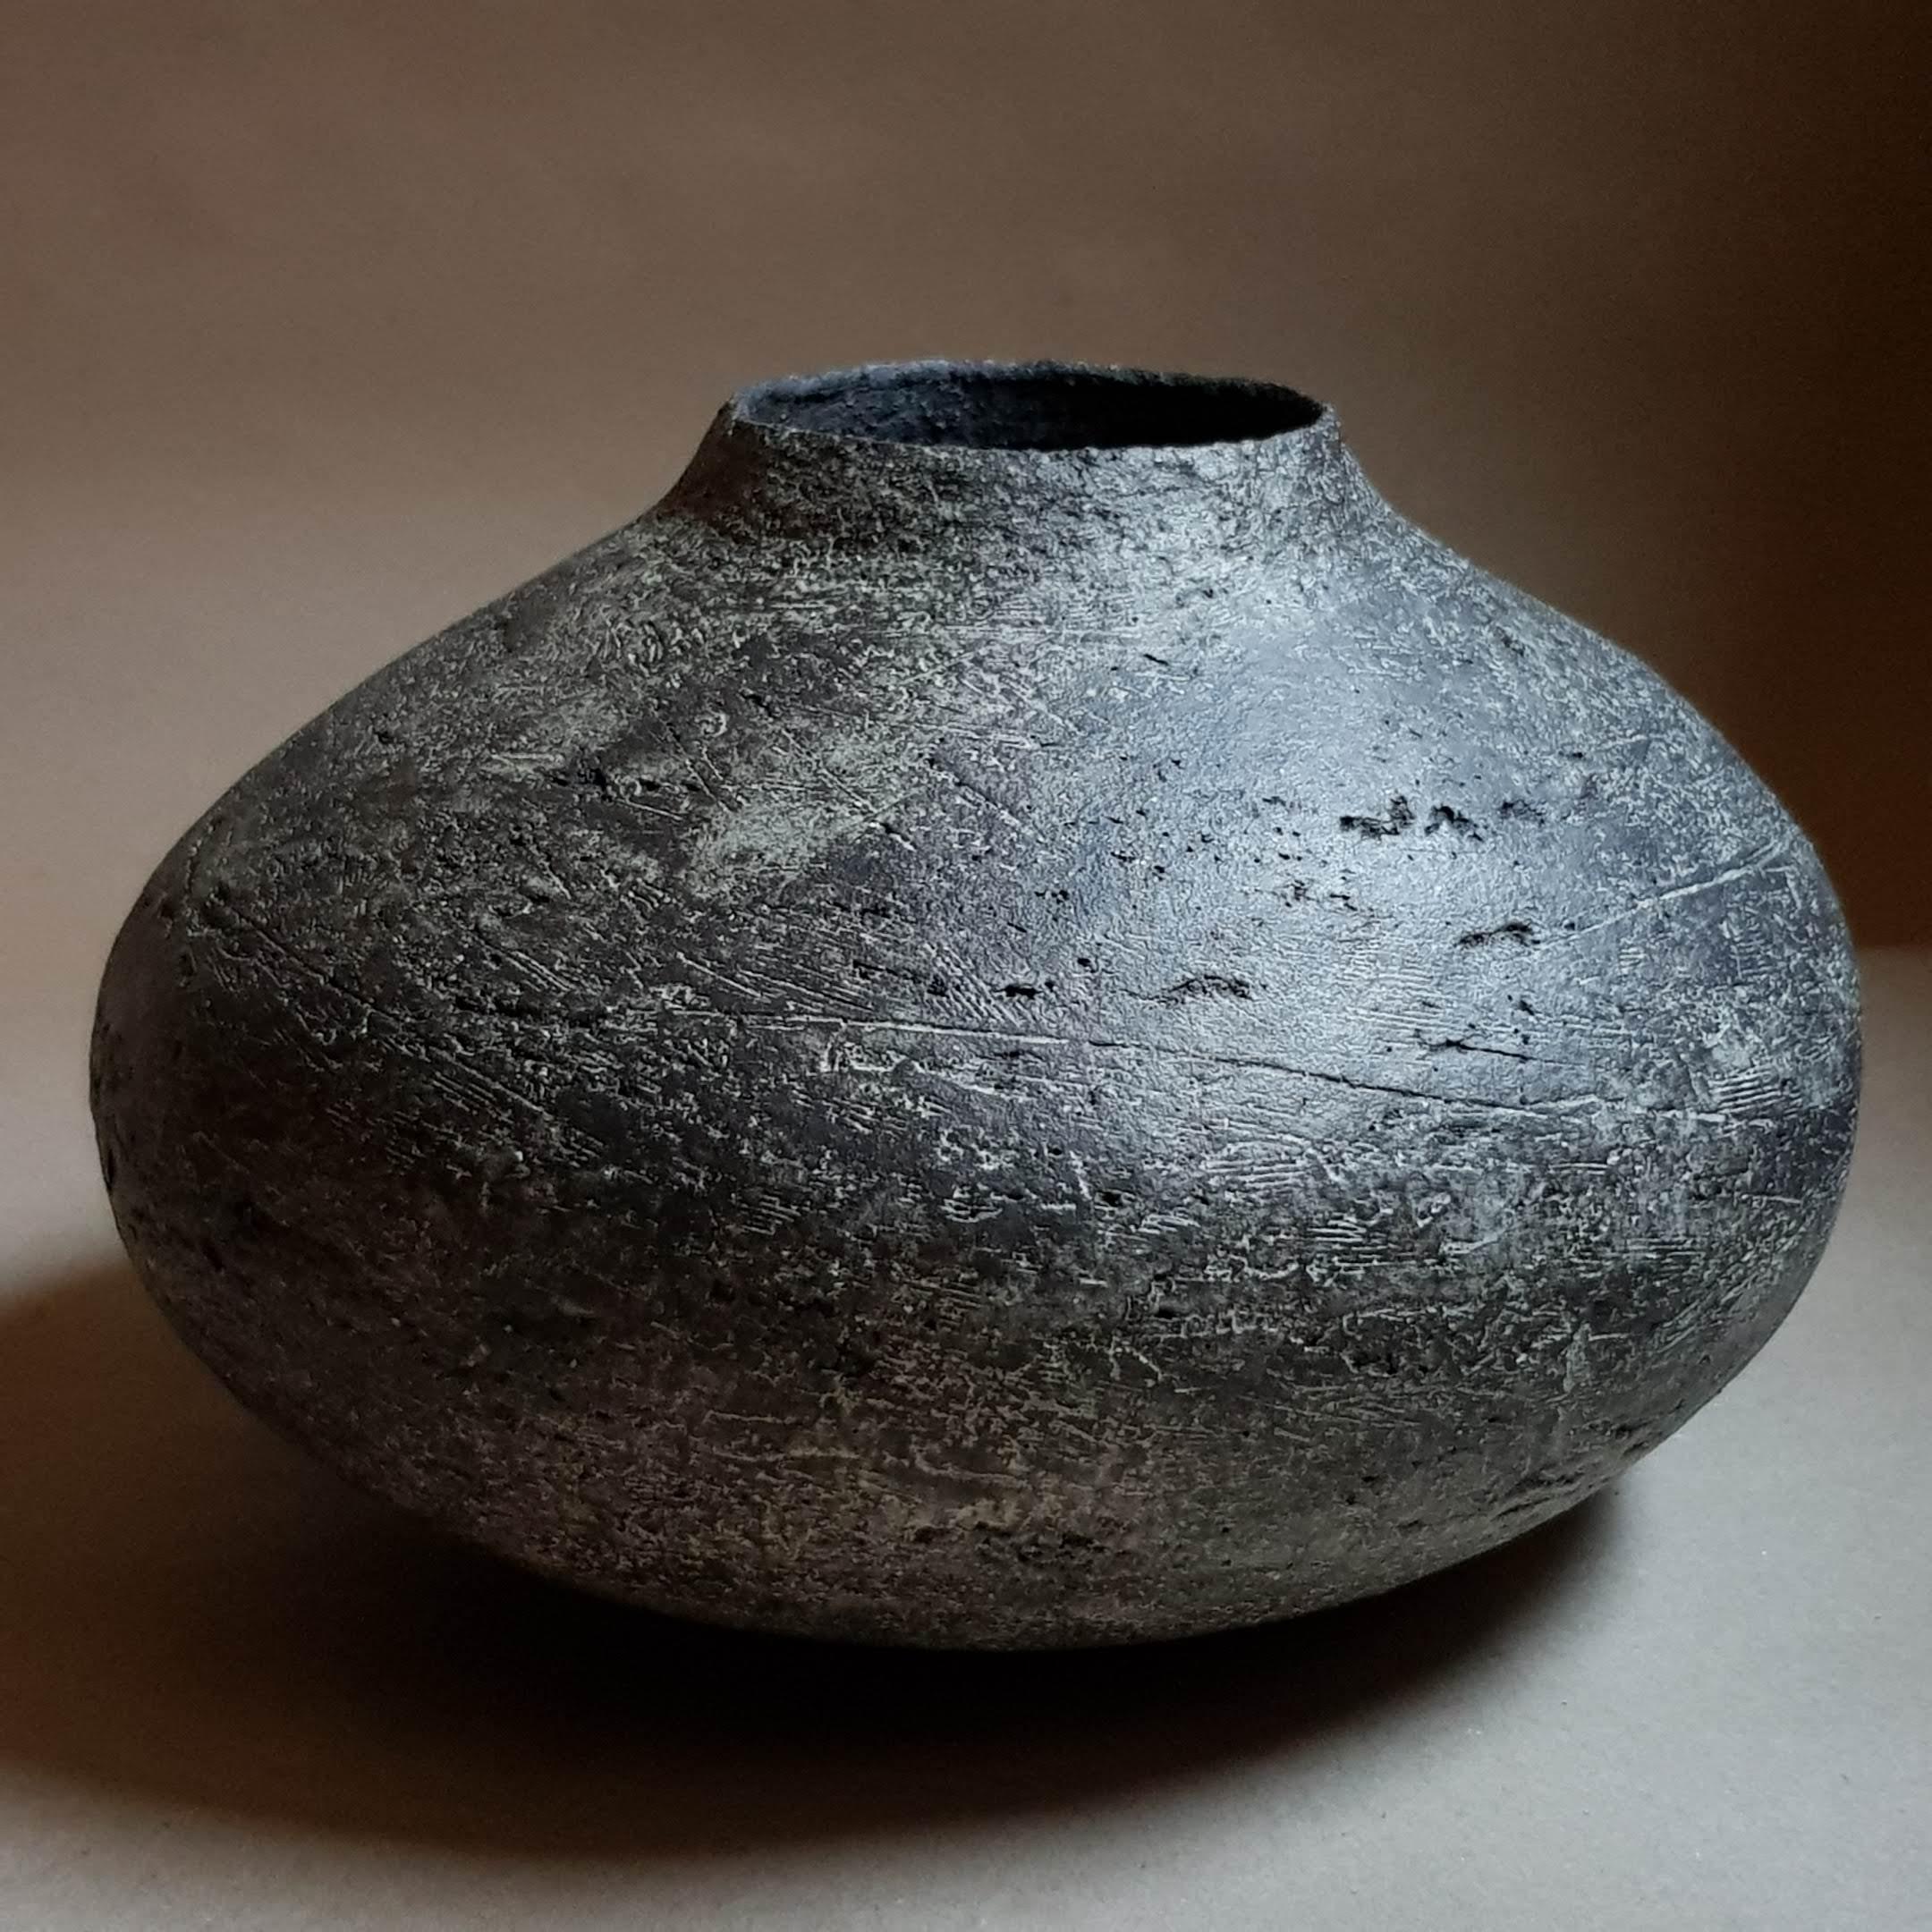 Black Stoneware Chytra Vase by Elena Vasilantonaki
Unique
Dimensions: ⌀ 27 x H 18 cm (Dimensions may vary)
Materials: Stoneware
Available finishes: Black, White, Brown, Red, Patina

Growing up in Greece I was surrounded by pottery forms that have